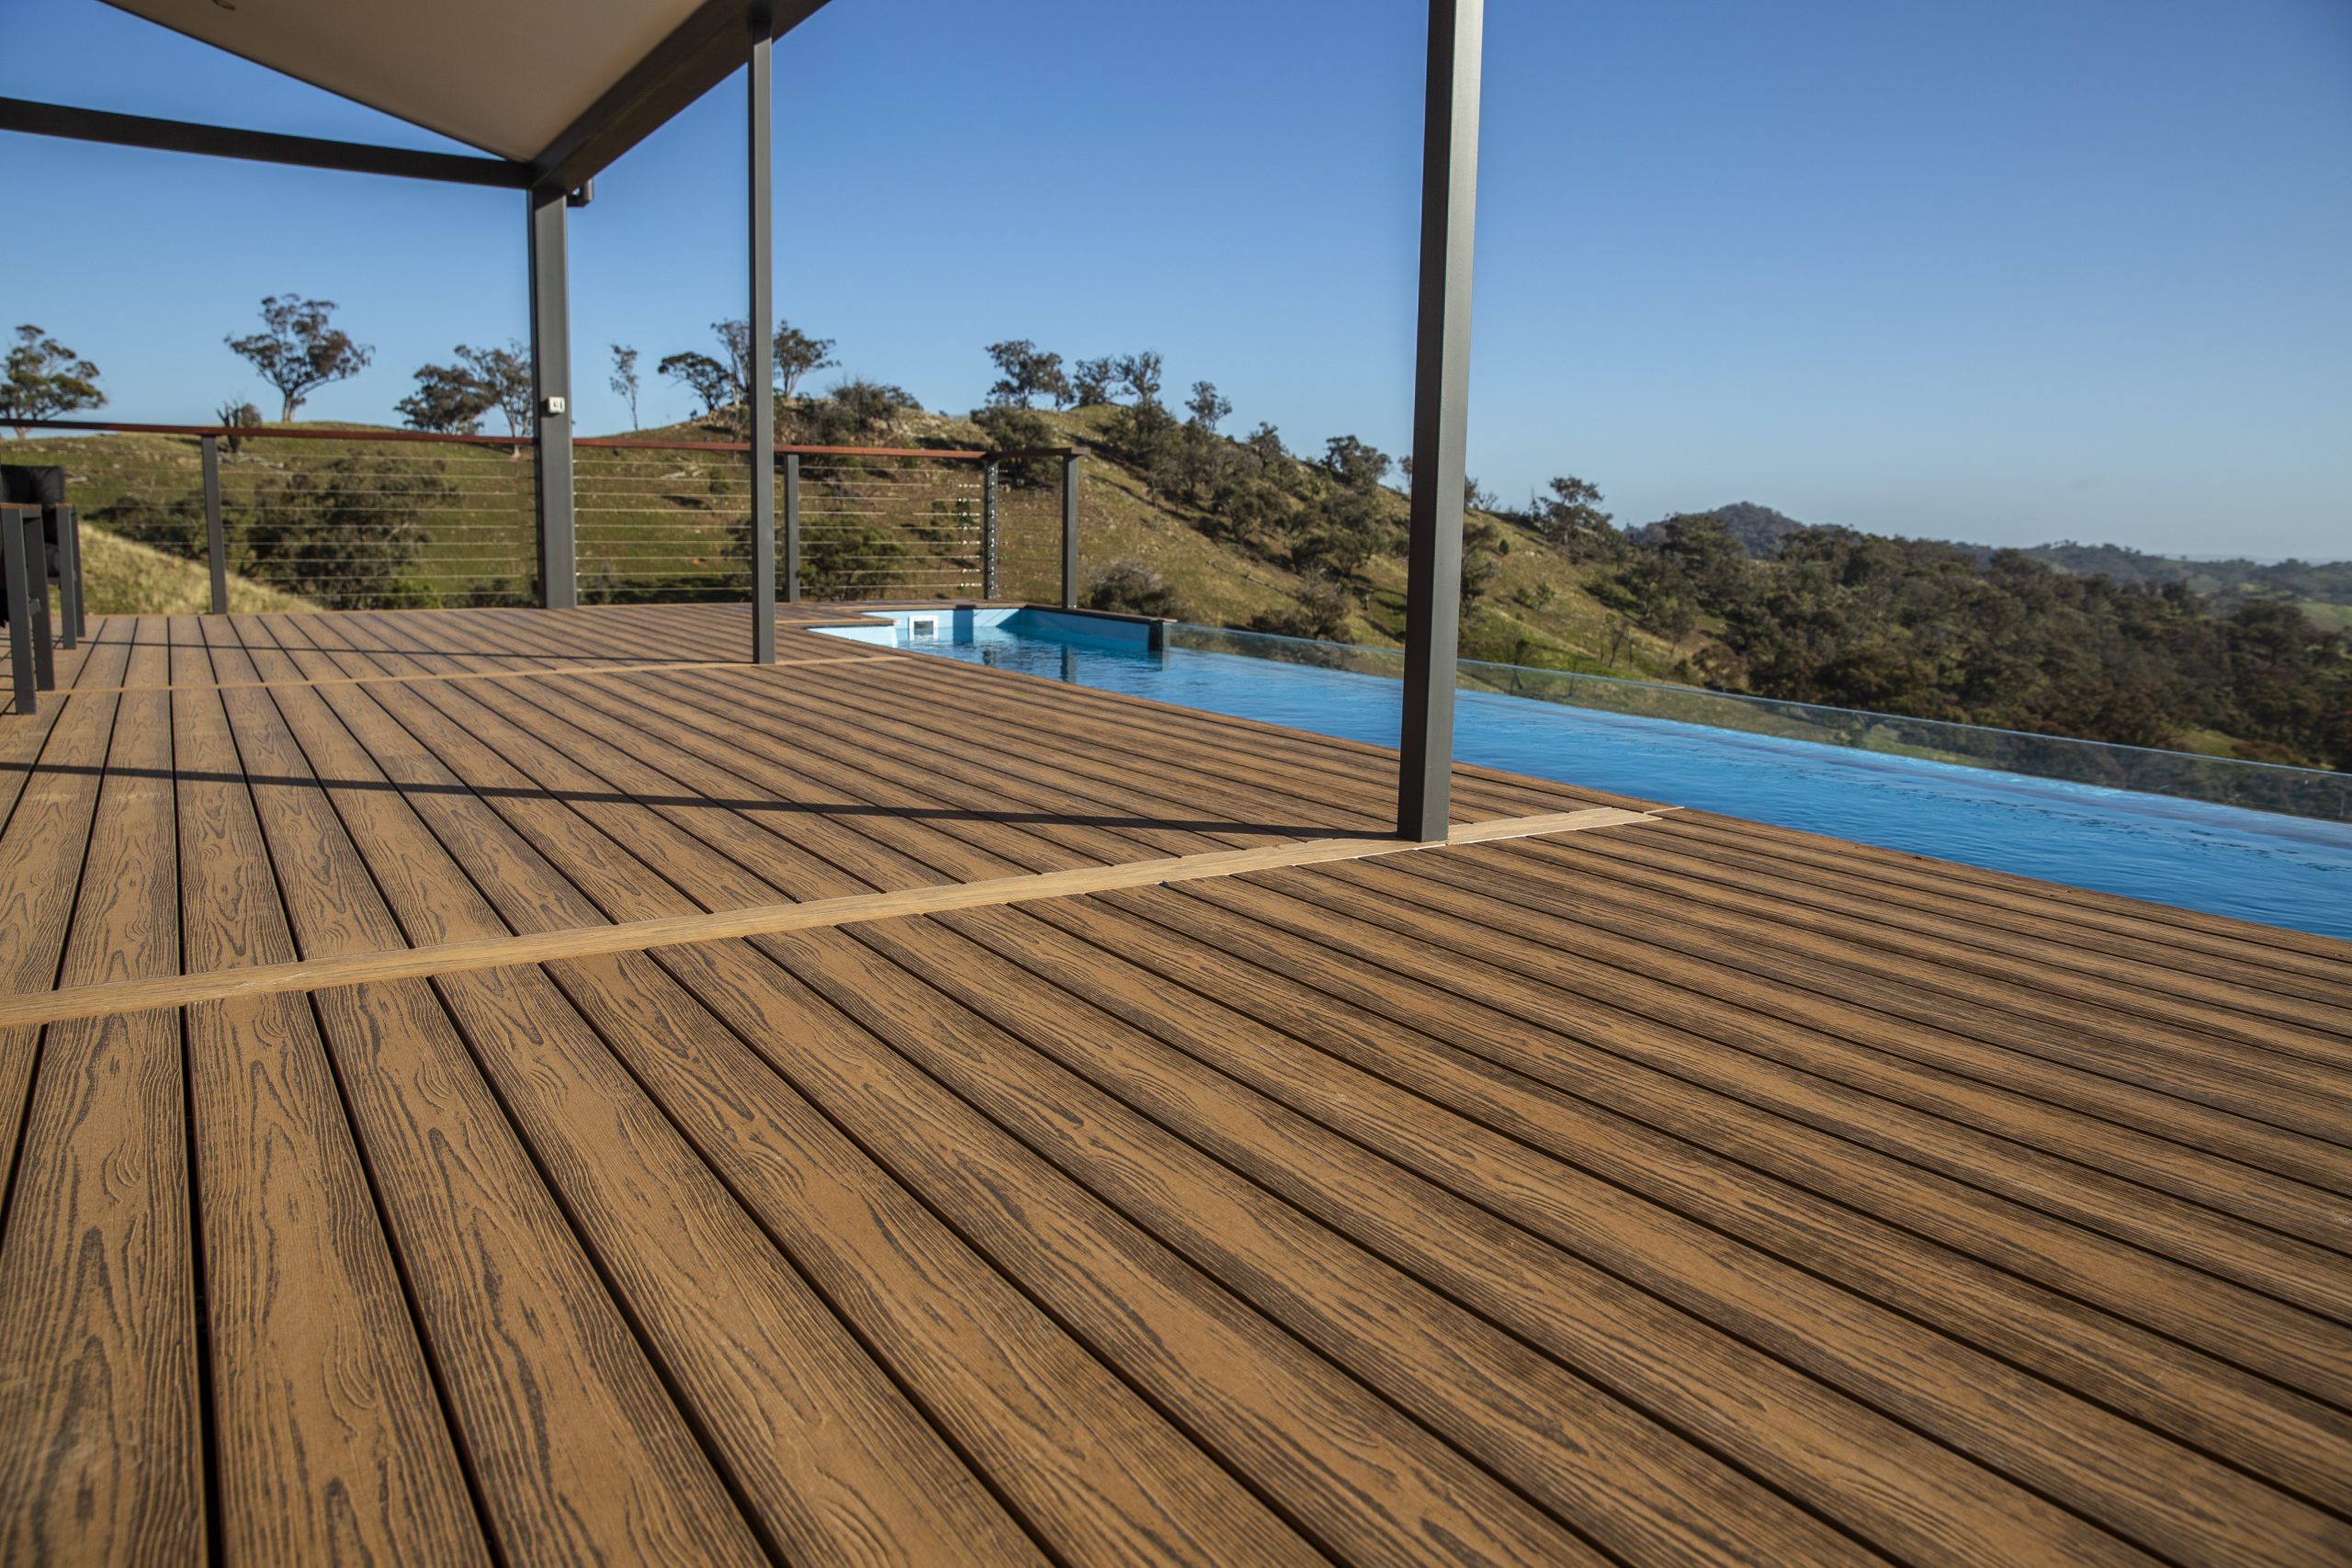 Brite composite decking boards next to a large, in ground swimming pool